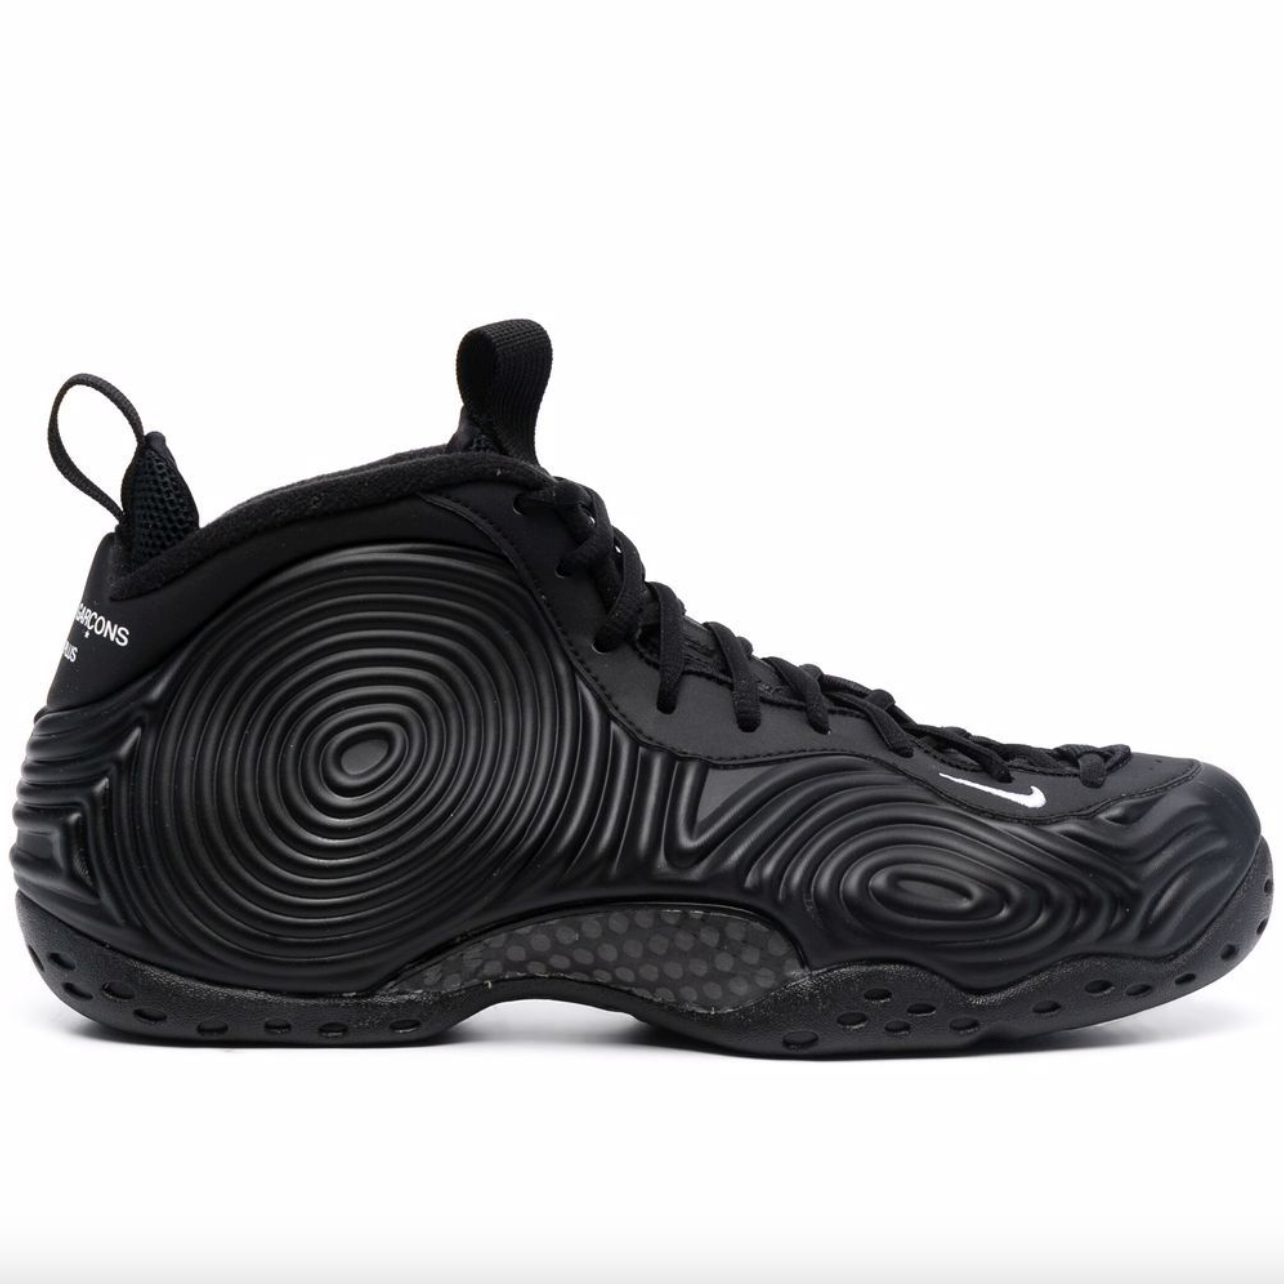 COMME des GARCONS NIKE POSITE ONE 28.0cm73000円で即決したいです